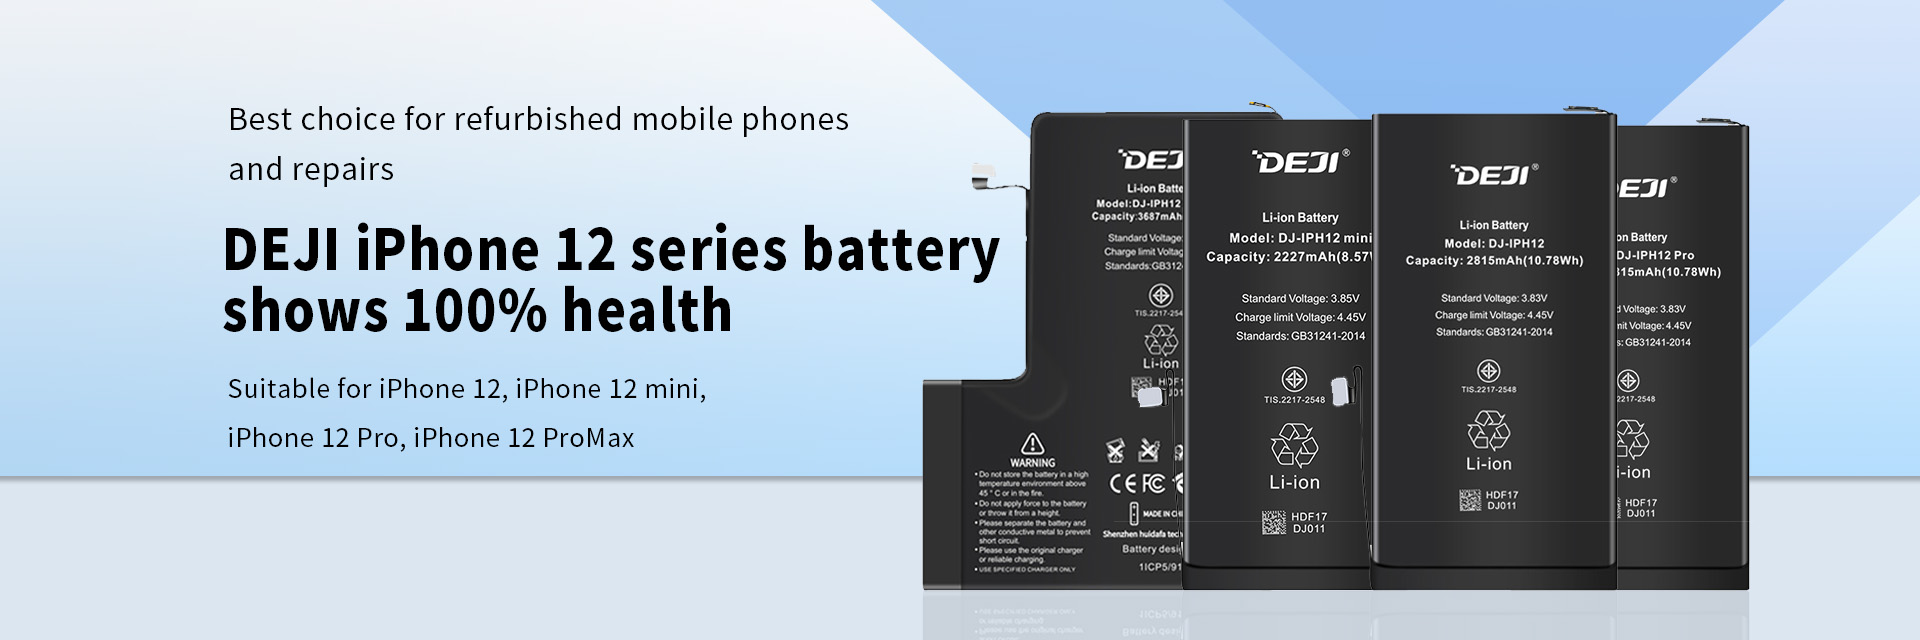 iPhone 12 Show 100% Health Battery